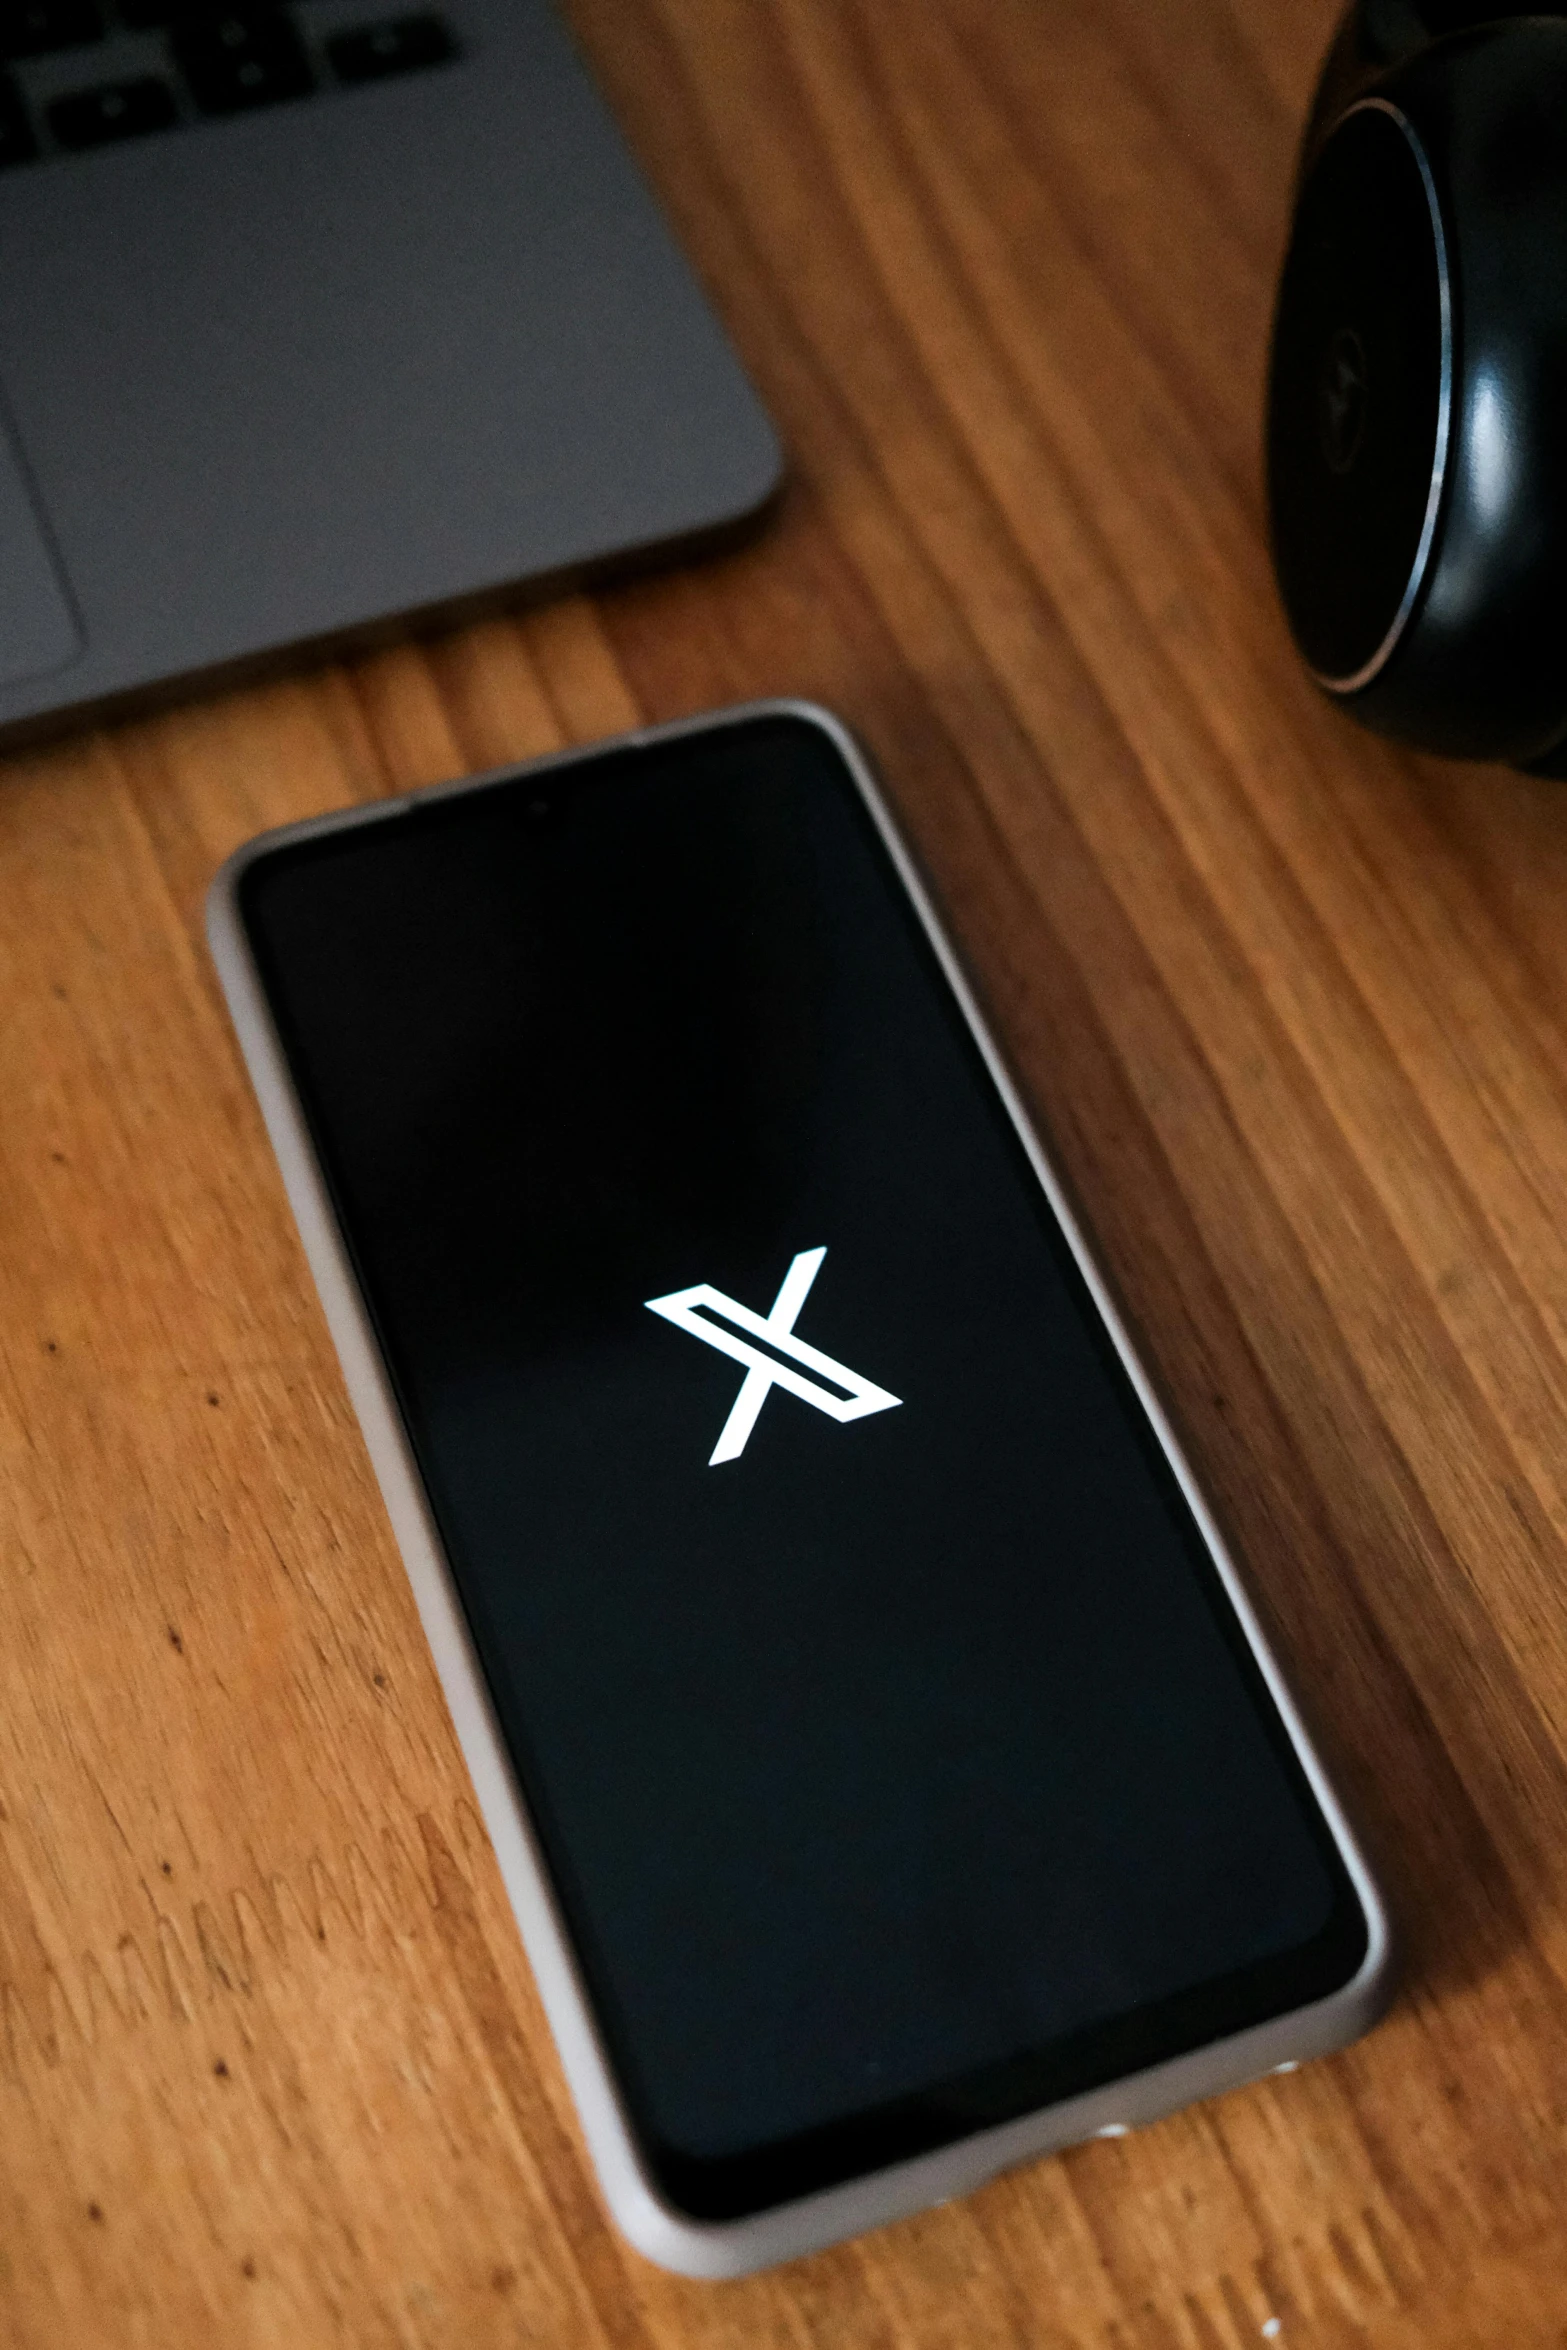 this is an image of a laptop with the x logo on the screen